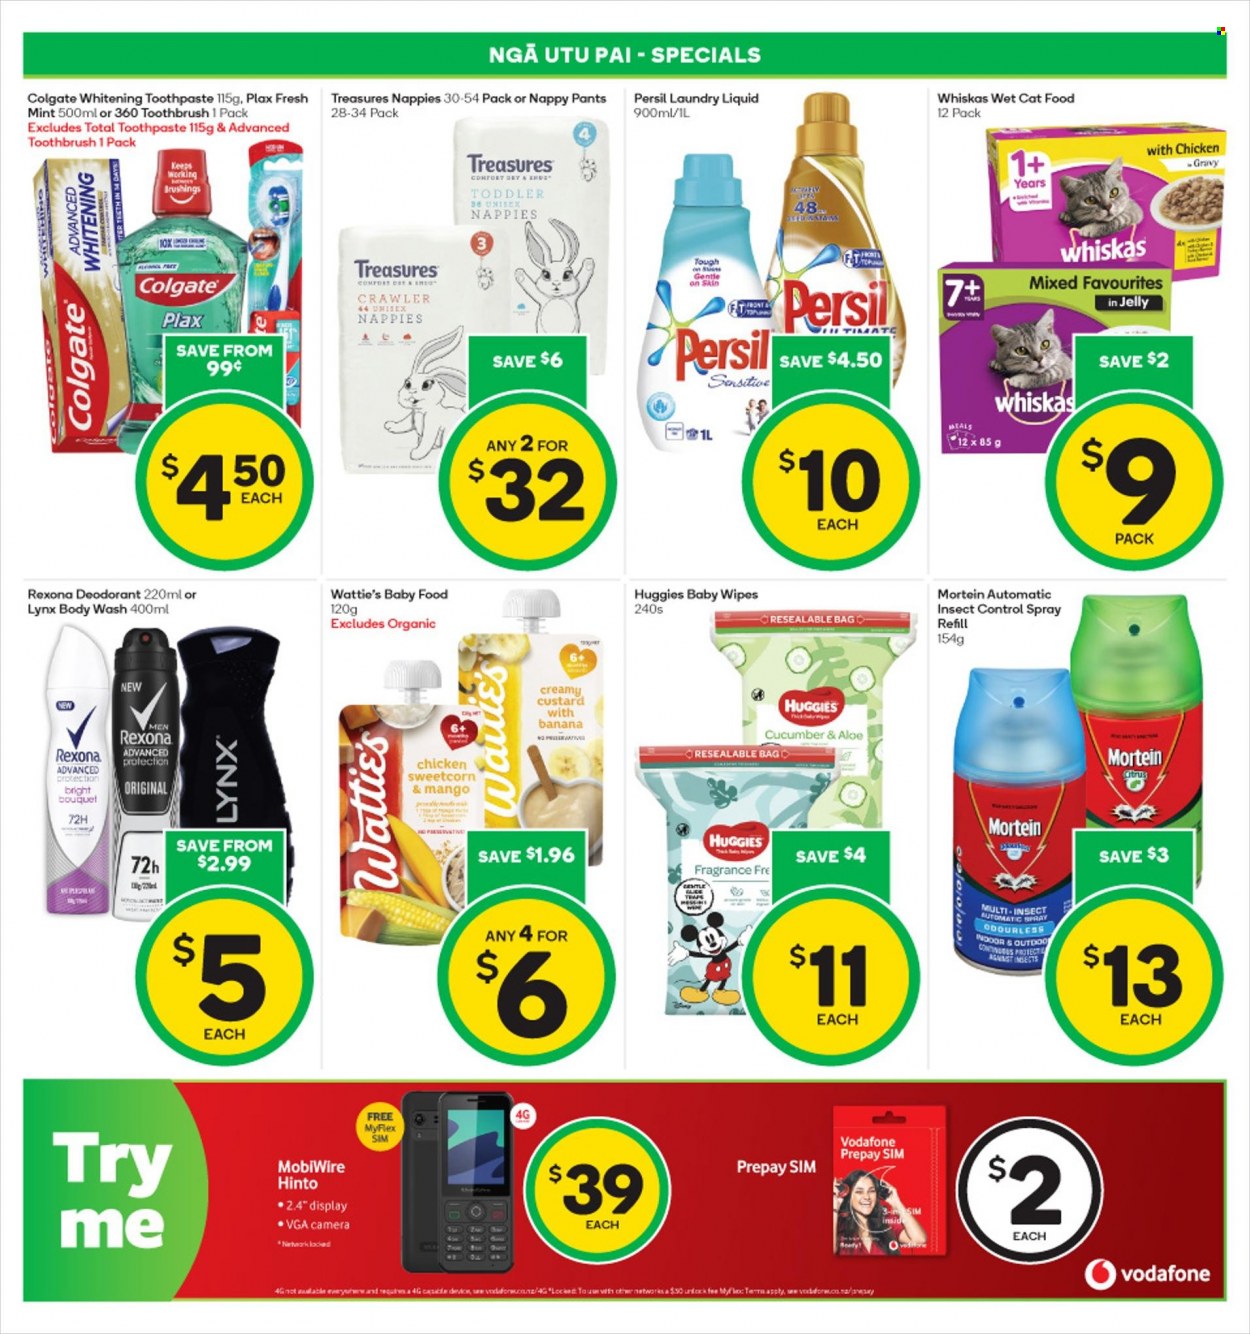 thumbnail - Countdown mailer - 28.11.2022 - 04.12.2022 - Sales products - Wattie's, custard, tea, wipes, Huggies, pants, baby wipes, nappies, Mortein, Persil, laundry detergent, body wash, Colgate, toothbrush, toothpaste, Plax, anti-perspirant, fragrance, Rexona, deodorant, bag, animal food, cat food, Whiskas, wet cat food, bouquet. Page 22.